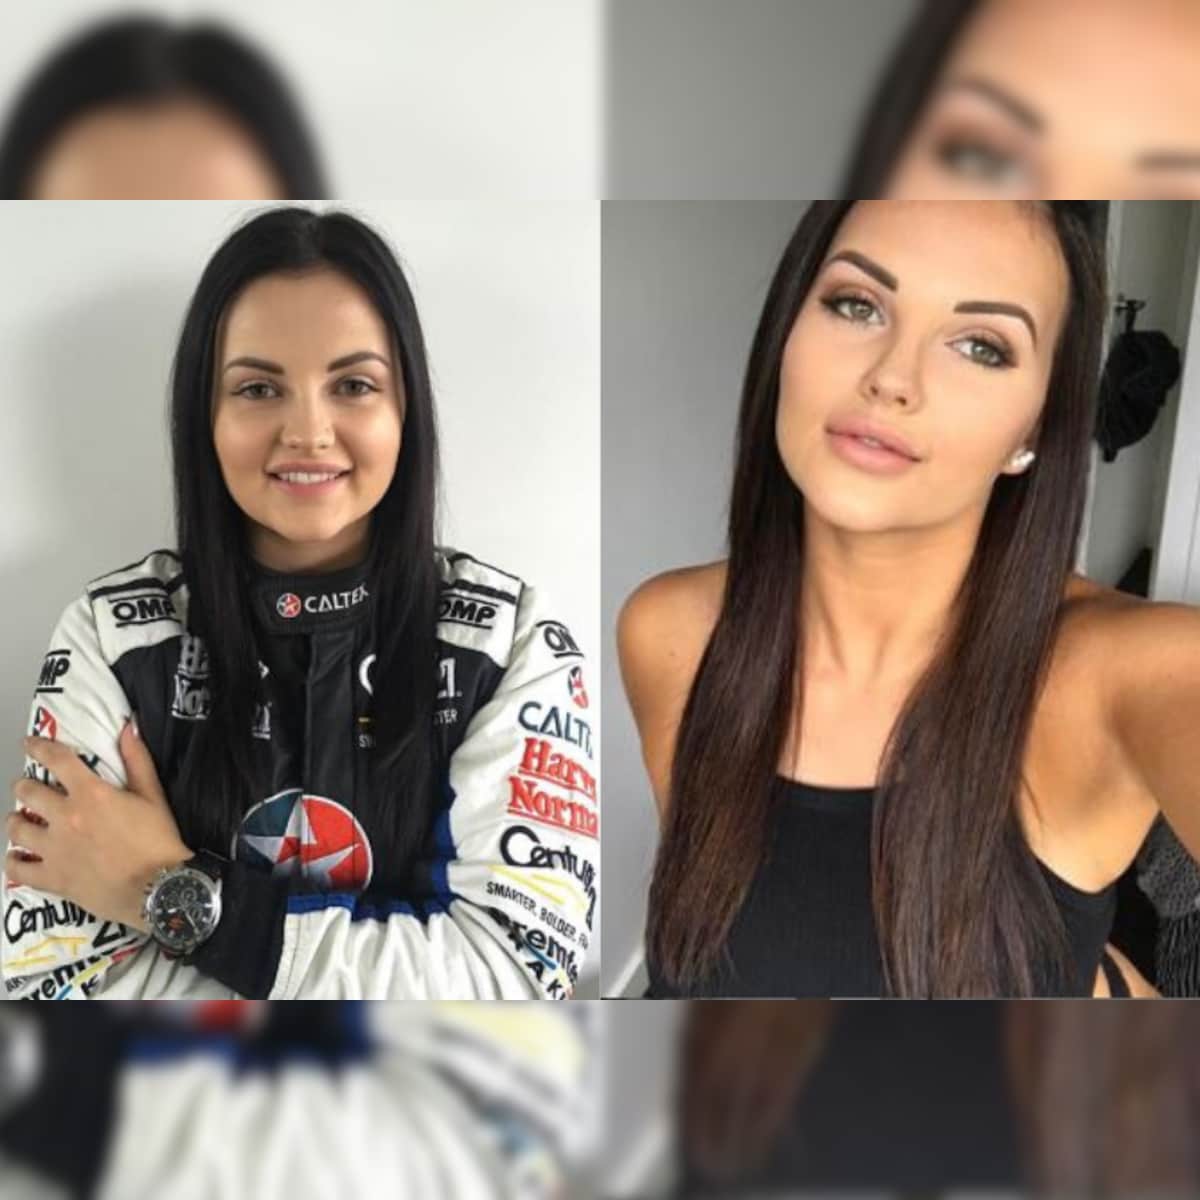 Alia Bhatt Ki Xxx Muvi - Supercars Racer Renee Gracie is Enjoying Career Switch to Selling Adult  Videos as it Gives Her 'Good Money'